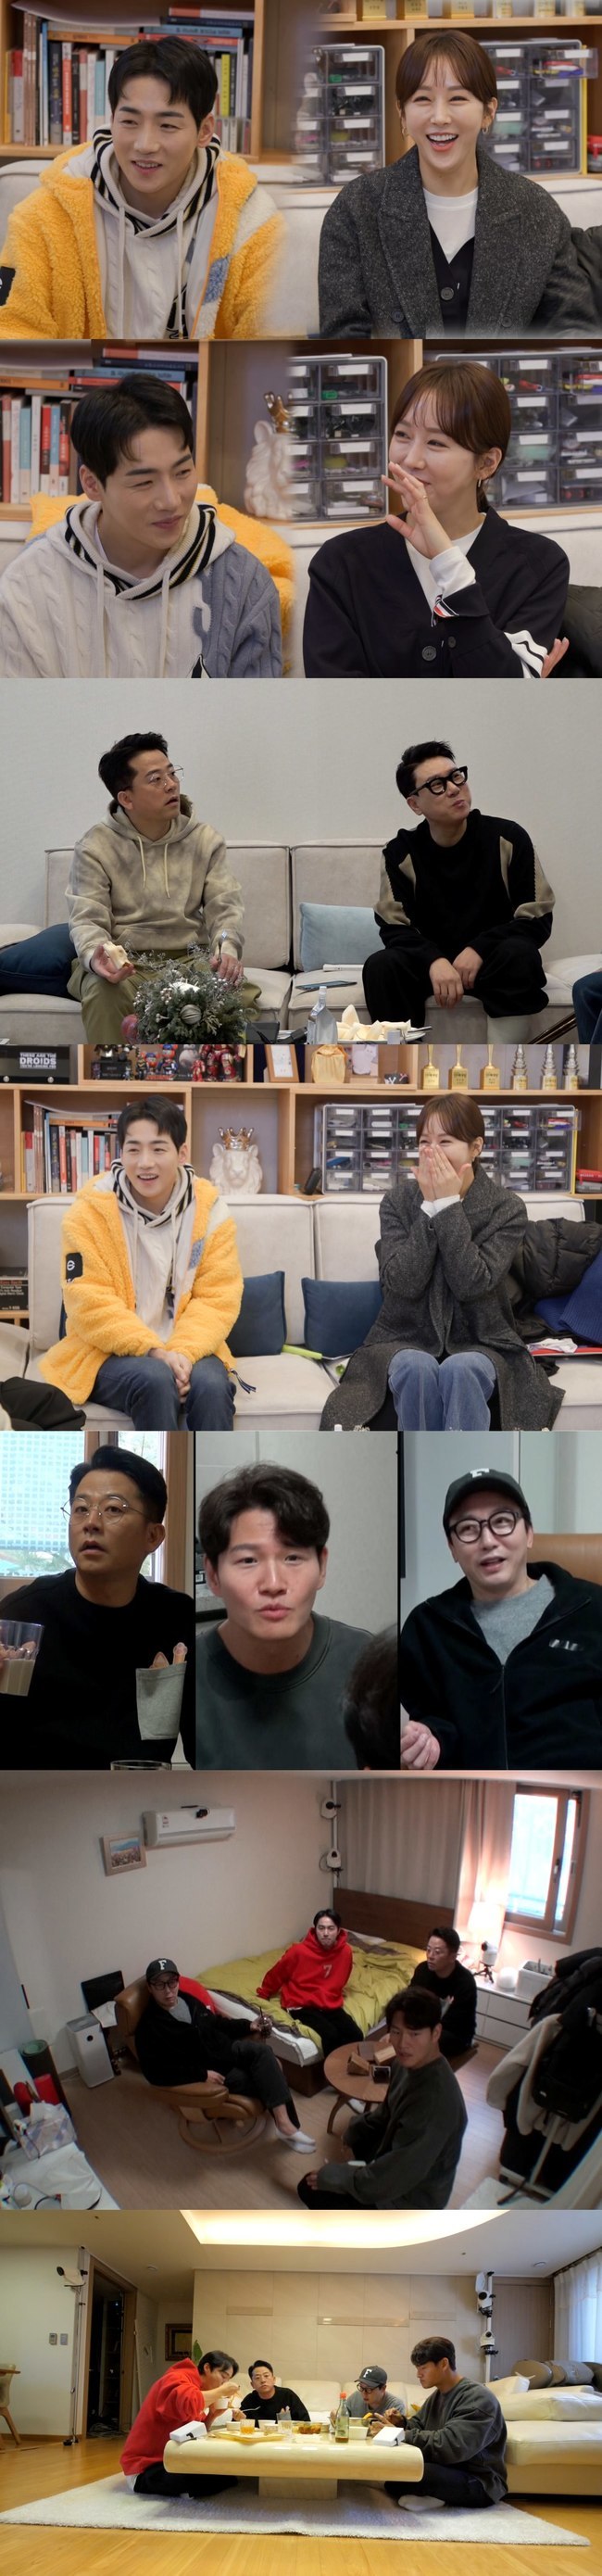 Park GunHan Young Love Story will be released in My Little Old Boy.On March 13, SBS My Little Old Boy will be the first to release the pink love story of eight-year-old Older and younger couple Park GunHan Young.Park GunHan Young couple who surprised everyone with the enthusiasm found Sangmins house.Lee Sang-min and Kim Jun-ho, who had no idea of ​​Park Guns devotion, could not keep quiet when Han Young was released as a girlfriend.Moreover, the news of Park Guns surprise marriage following his devotion was reported, and the studio was once again overturned.Brothers storm questions also followed the news of his brother Park Guns marriage.When the love story of the two people was first released to the occasion, the first kiss, and the proposal, everyones attention was focused.Han Youngs response to Park Guns Confessions, I like you too, was a red face.When the romantic proposal that captivated Han Youngs heart was revealed, the studio could not hide its envy at the appearance of the Alcondak Spare part.